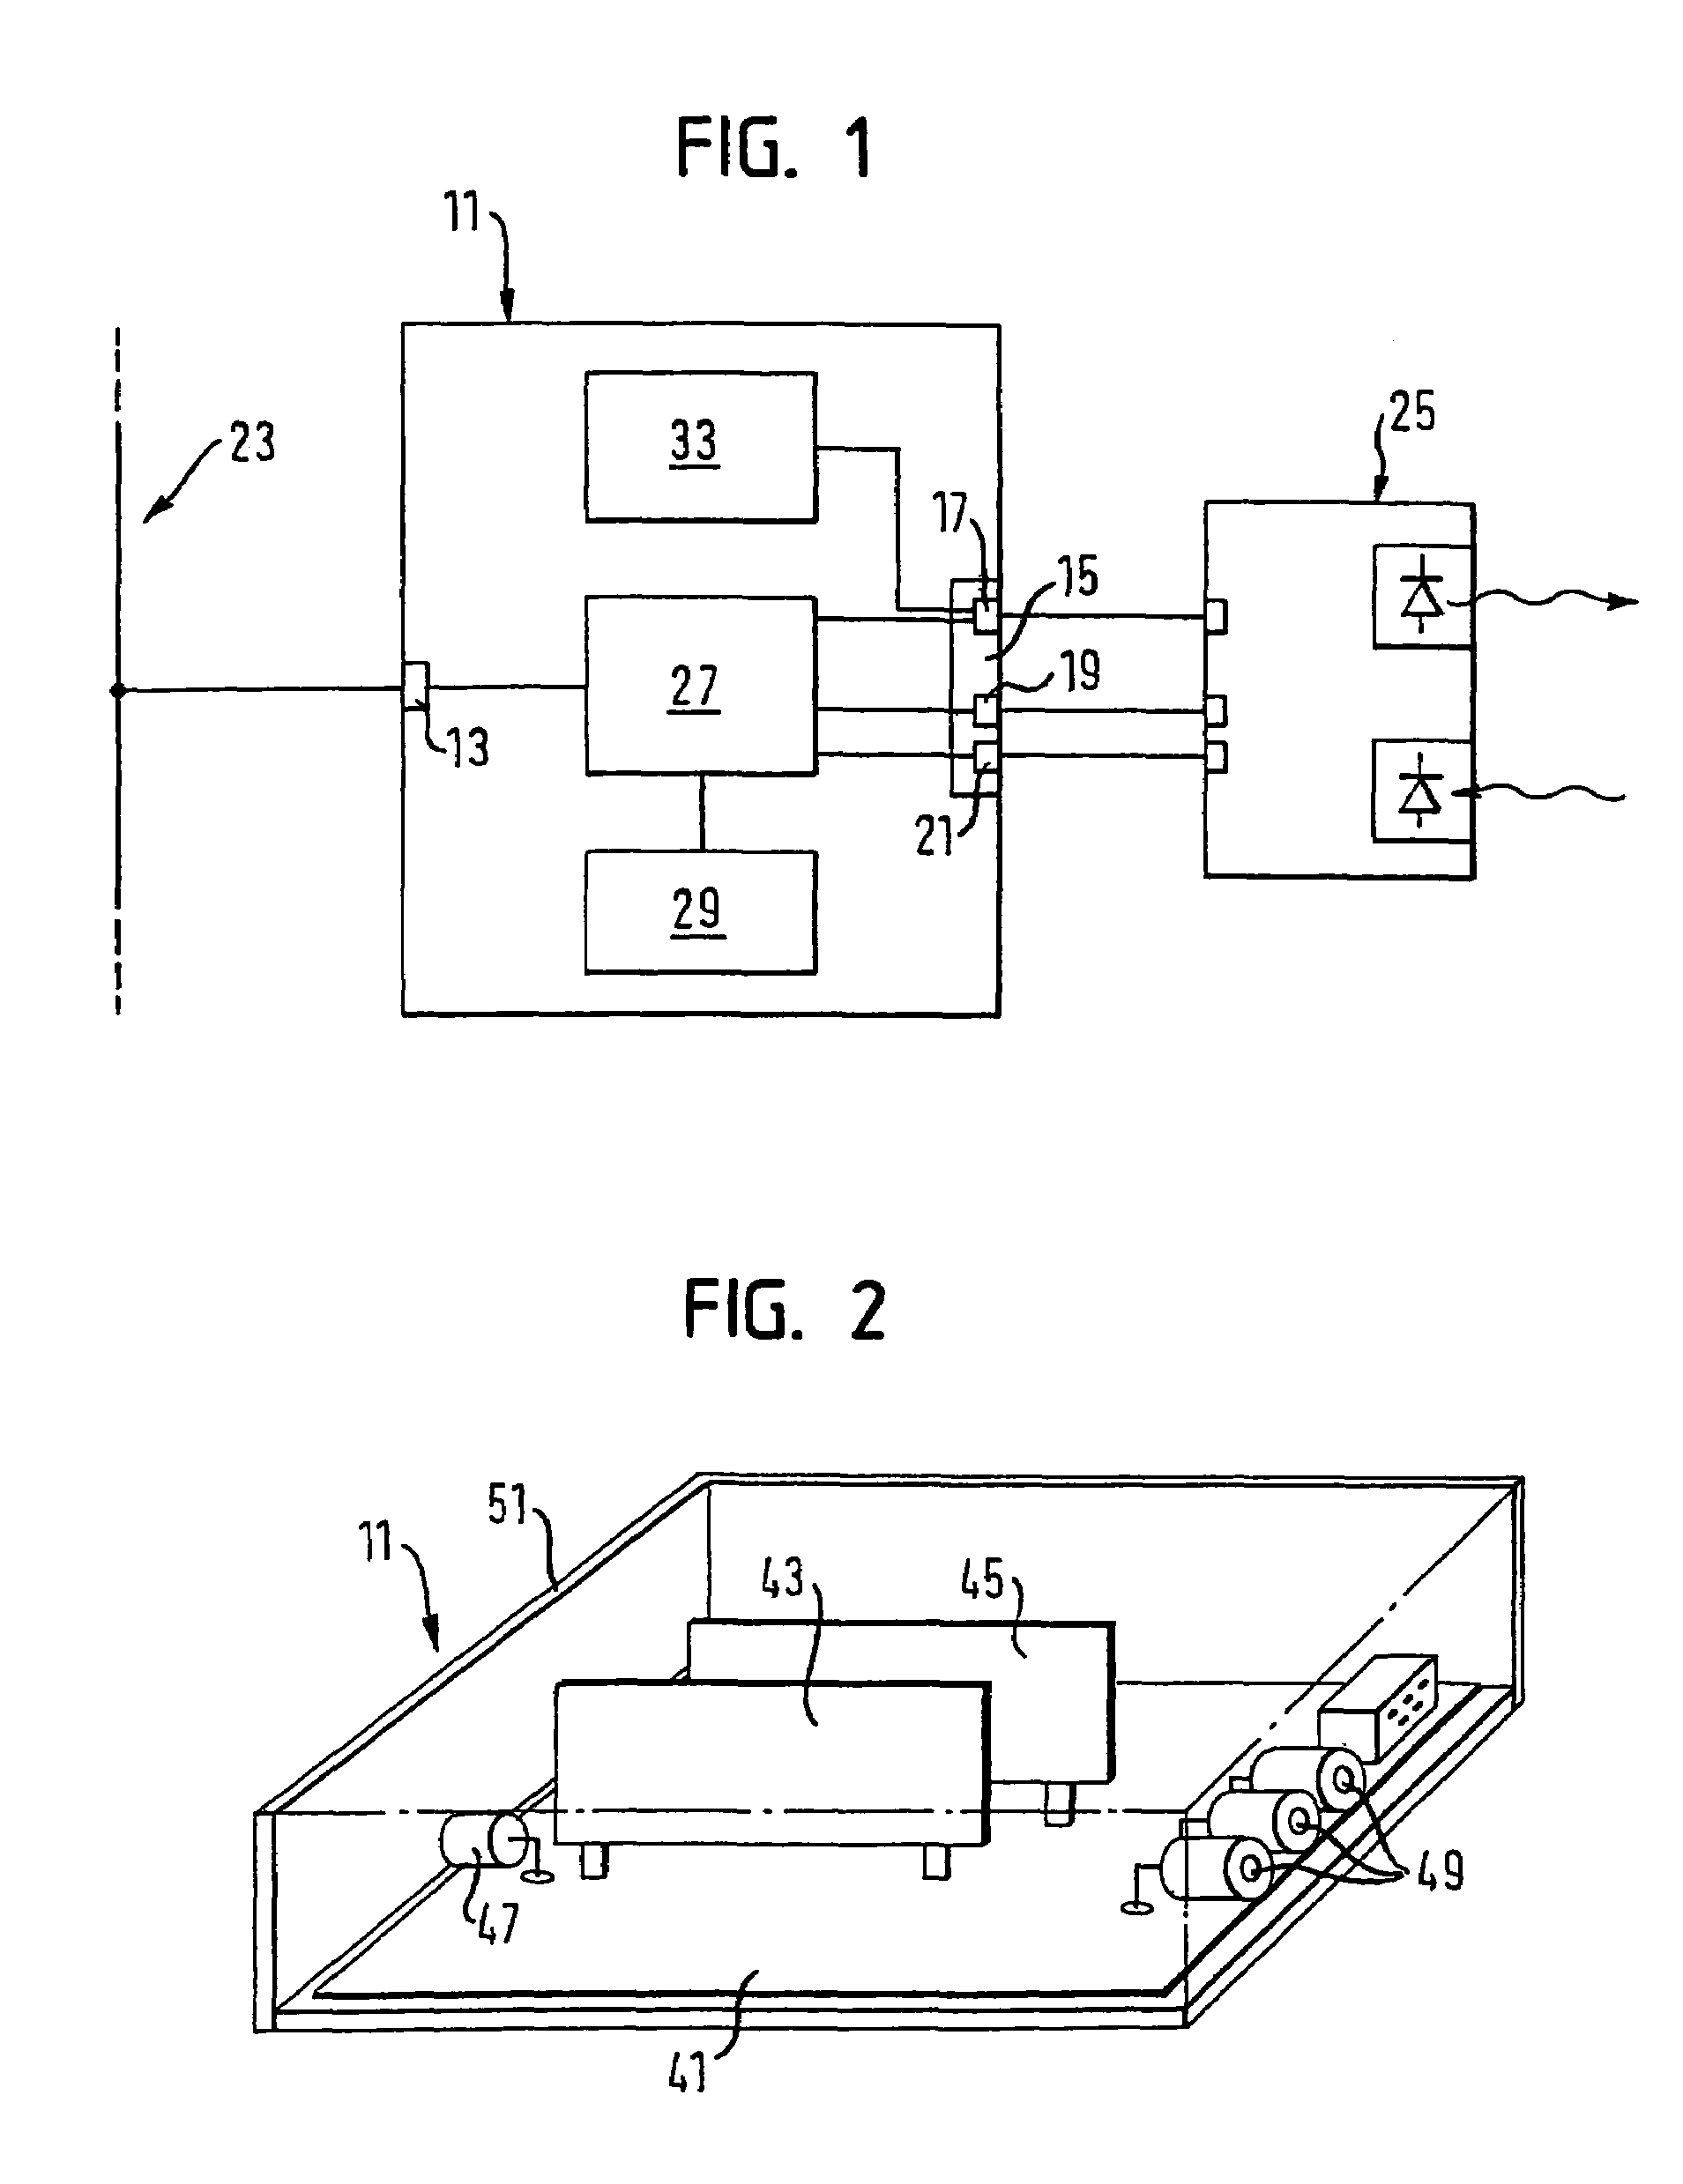 Connection module for the connection of a sensor to a fieldbus